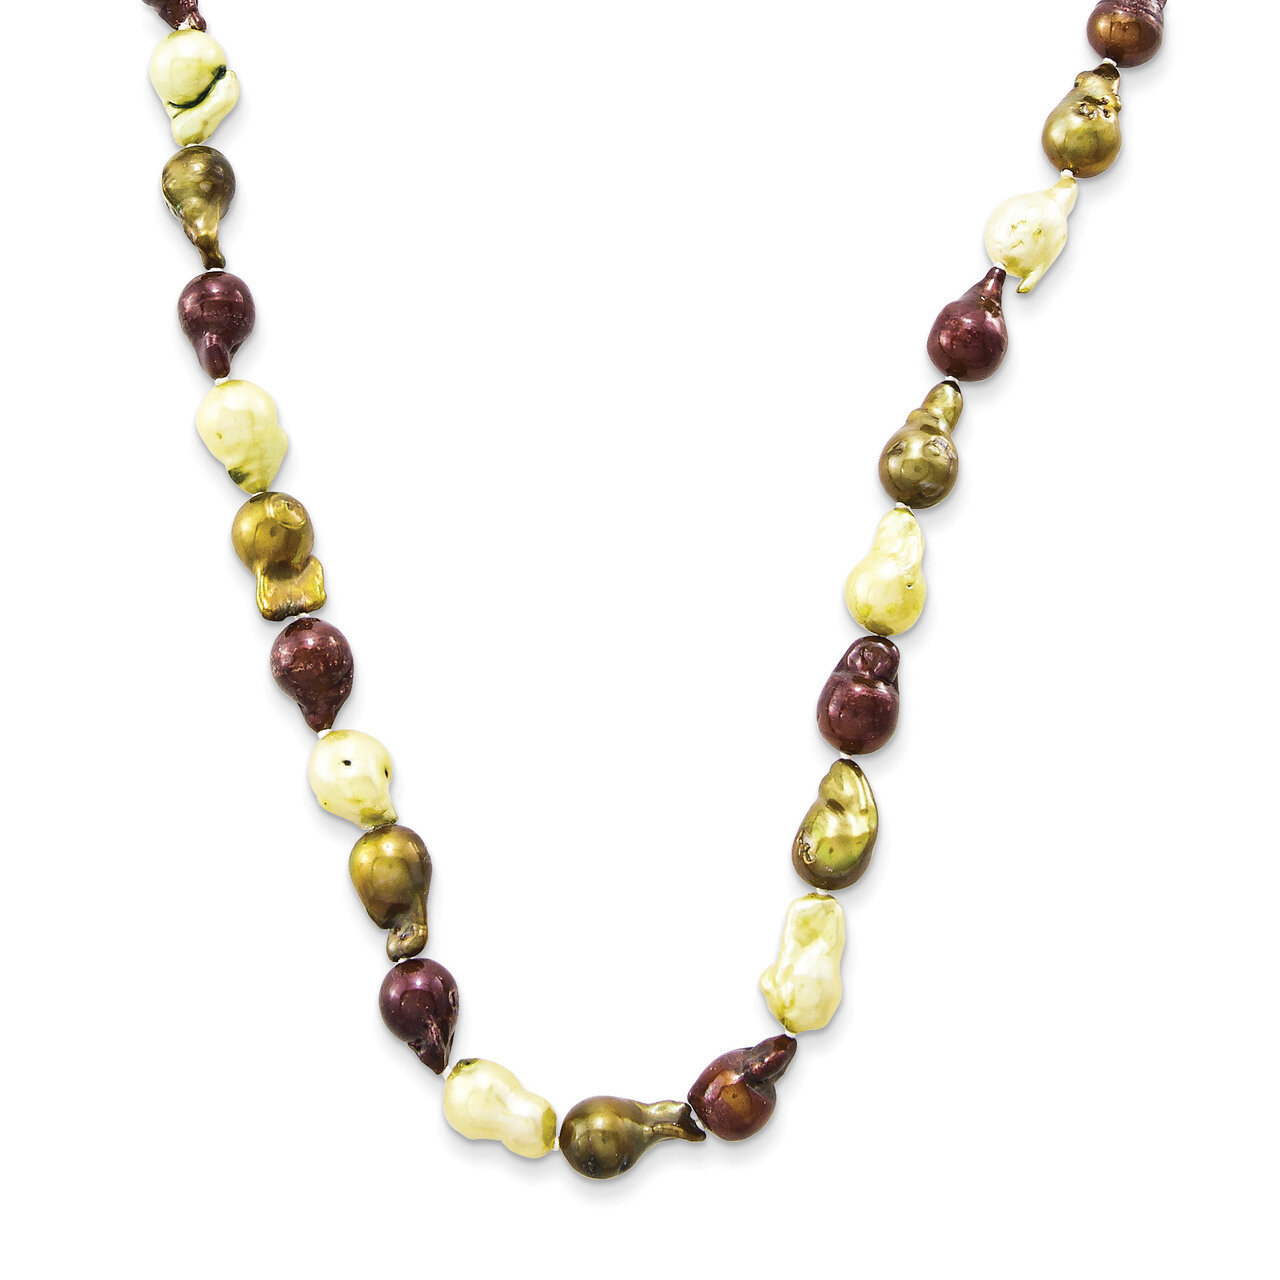 Brown, Olive & Cream 10-10.5mm FW Cultured Baroque Pearl Necklace QH3052-32